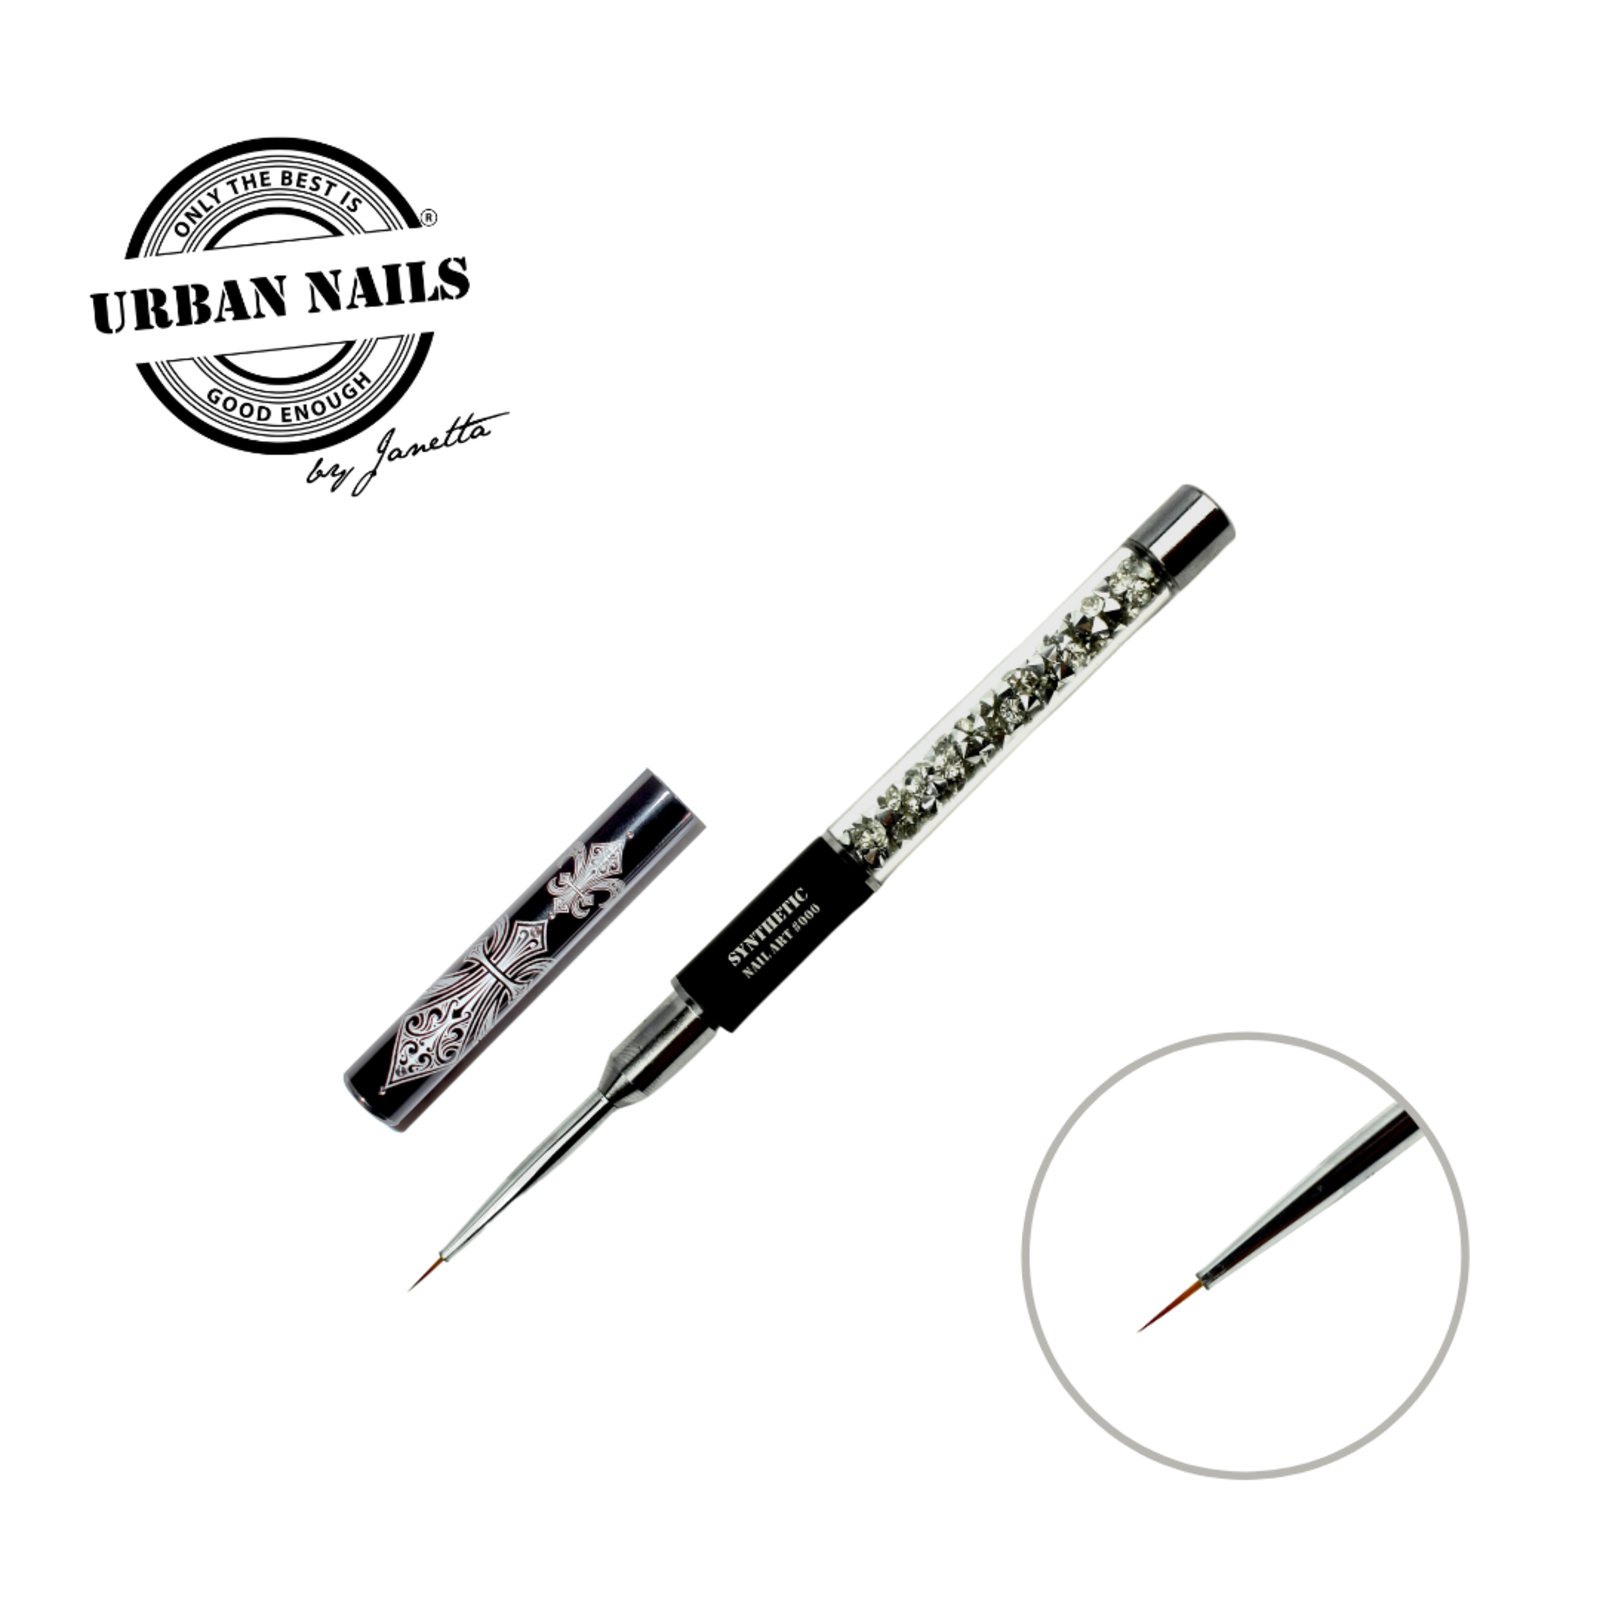 Urban nails Exclusive Synthetic #000 Fine Liner penseel